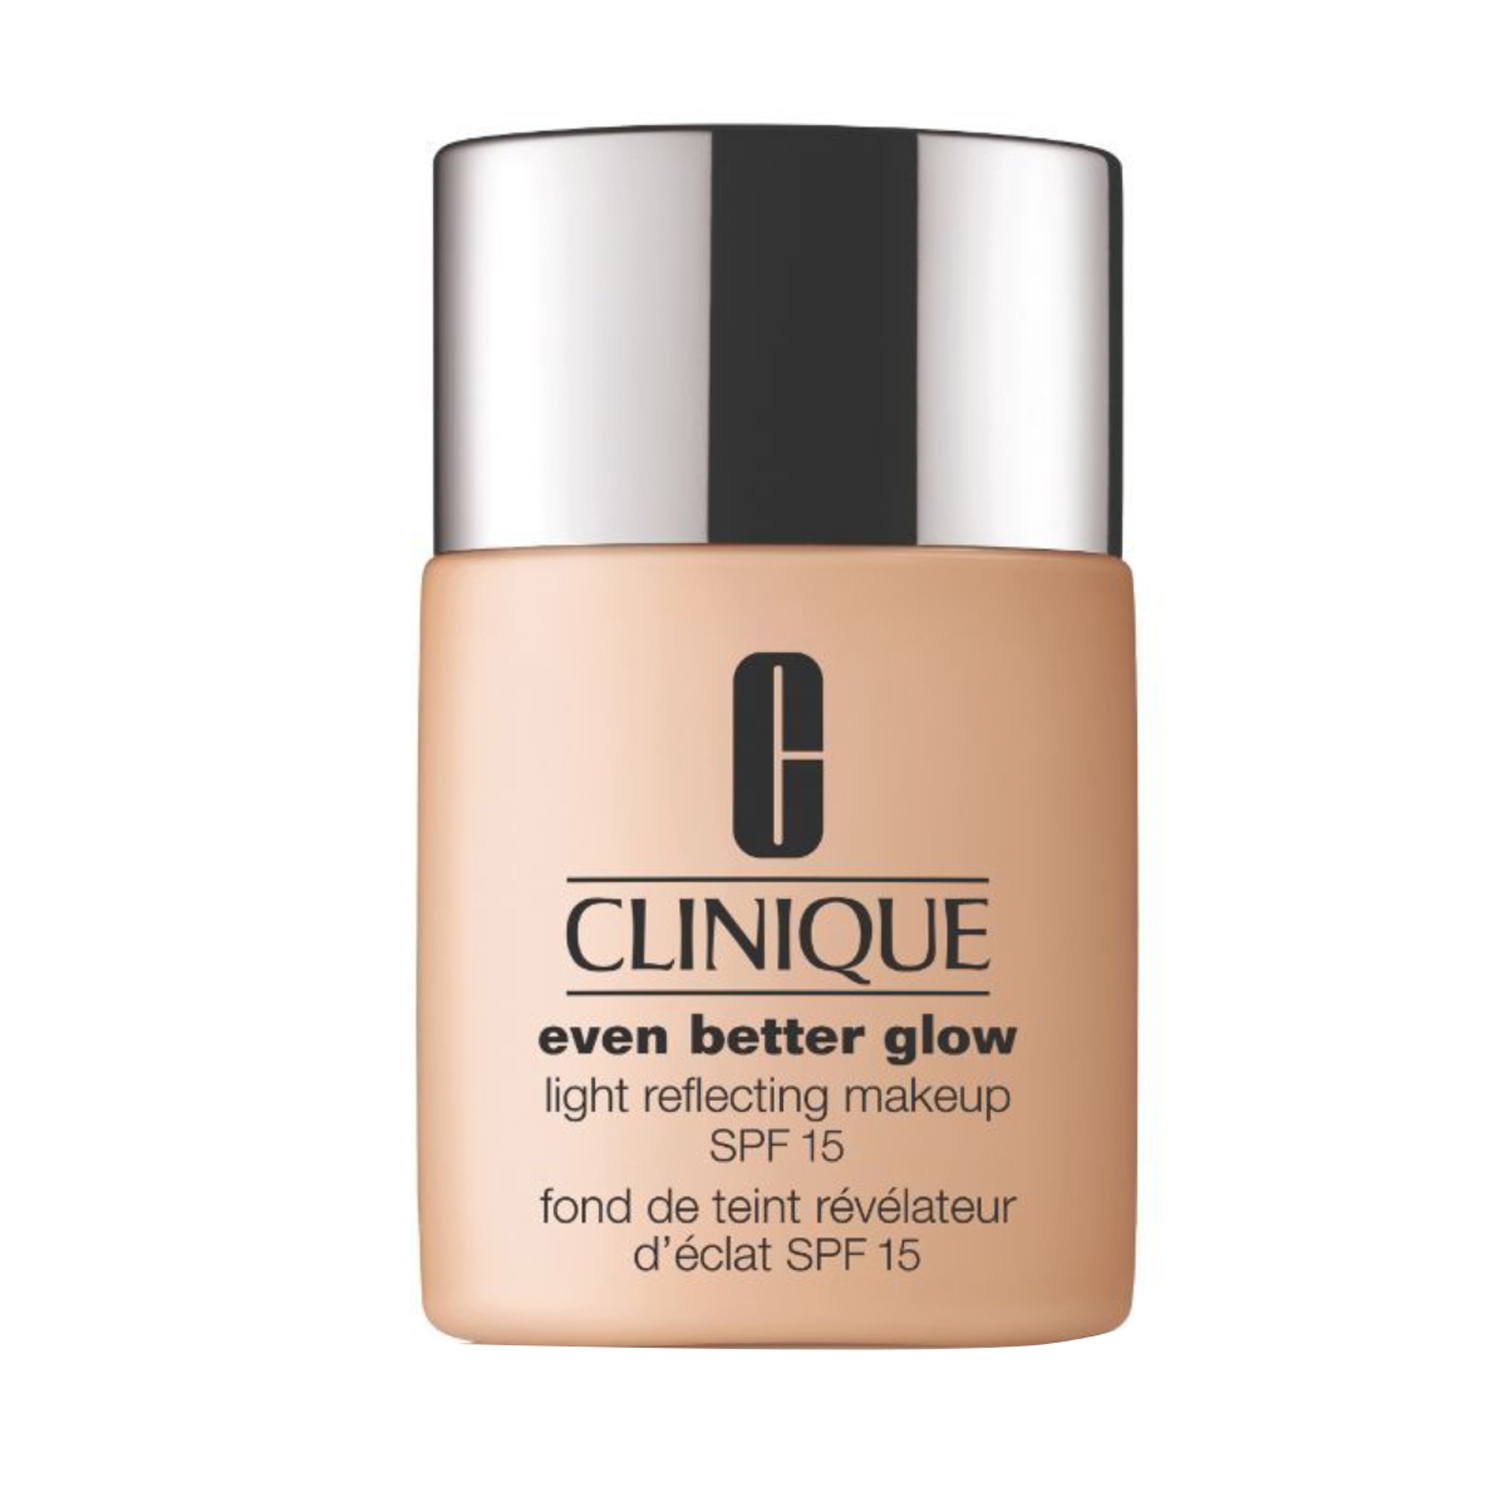 CLINIQUE | CLINIQUE Even Better Glow Light Reflecting Makeup Foundation SPF 15 - CN 28 Ivory (30ml)